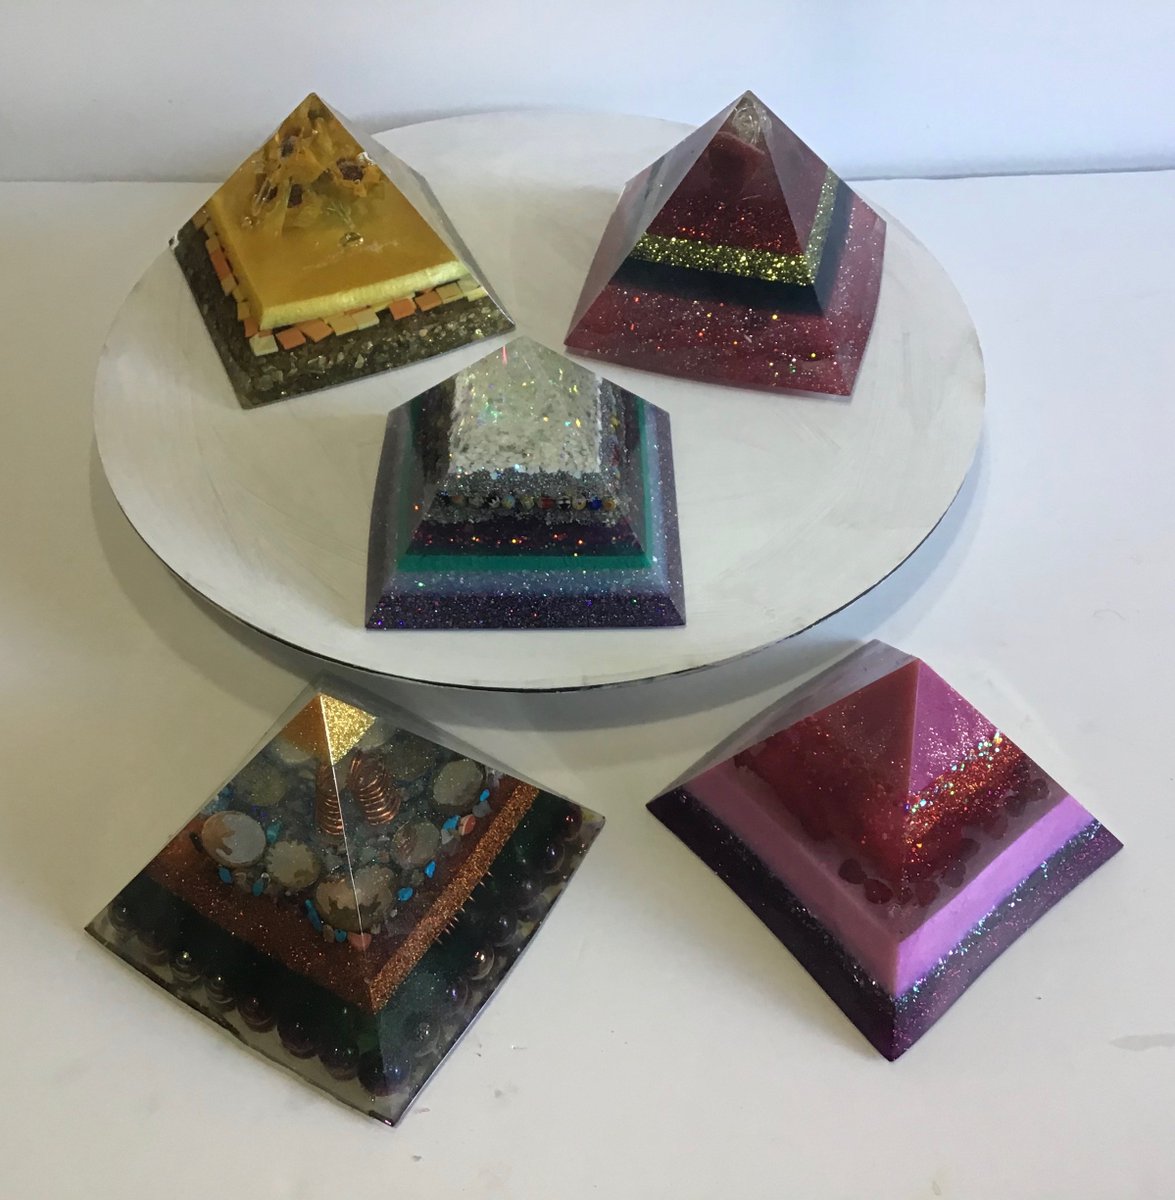 #BUY #HANDCRAFTED #COASTERS, #GEODECOASTERS, #RESINPYRAMIDS, and #COASTERSETS made by #Worcestershire artist Roger Ricketts. #christmasideas #coastersforsale #coasters #geodecoasters #geodeart #resinart  #worcestershirehour EMAIL info@rogersartwork.co.uk #supportsmallbusinesses